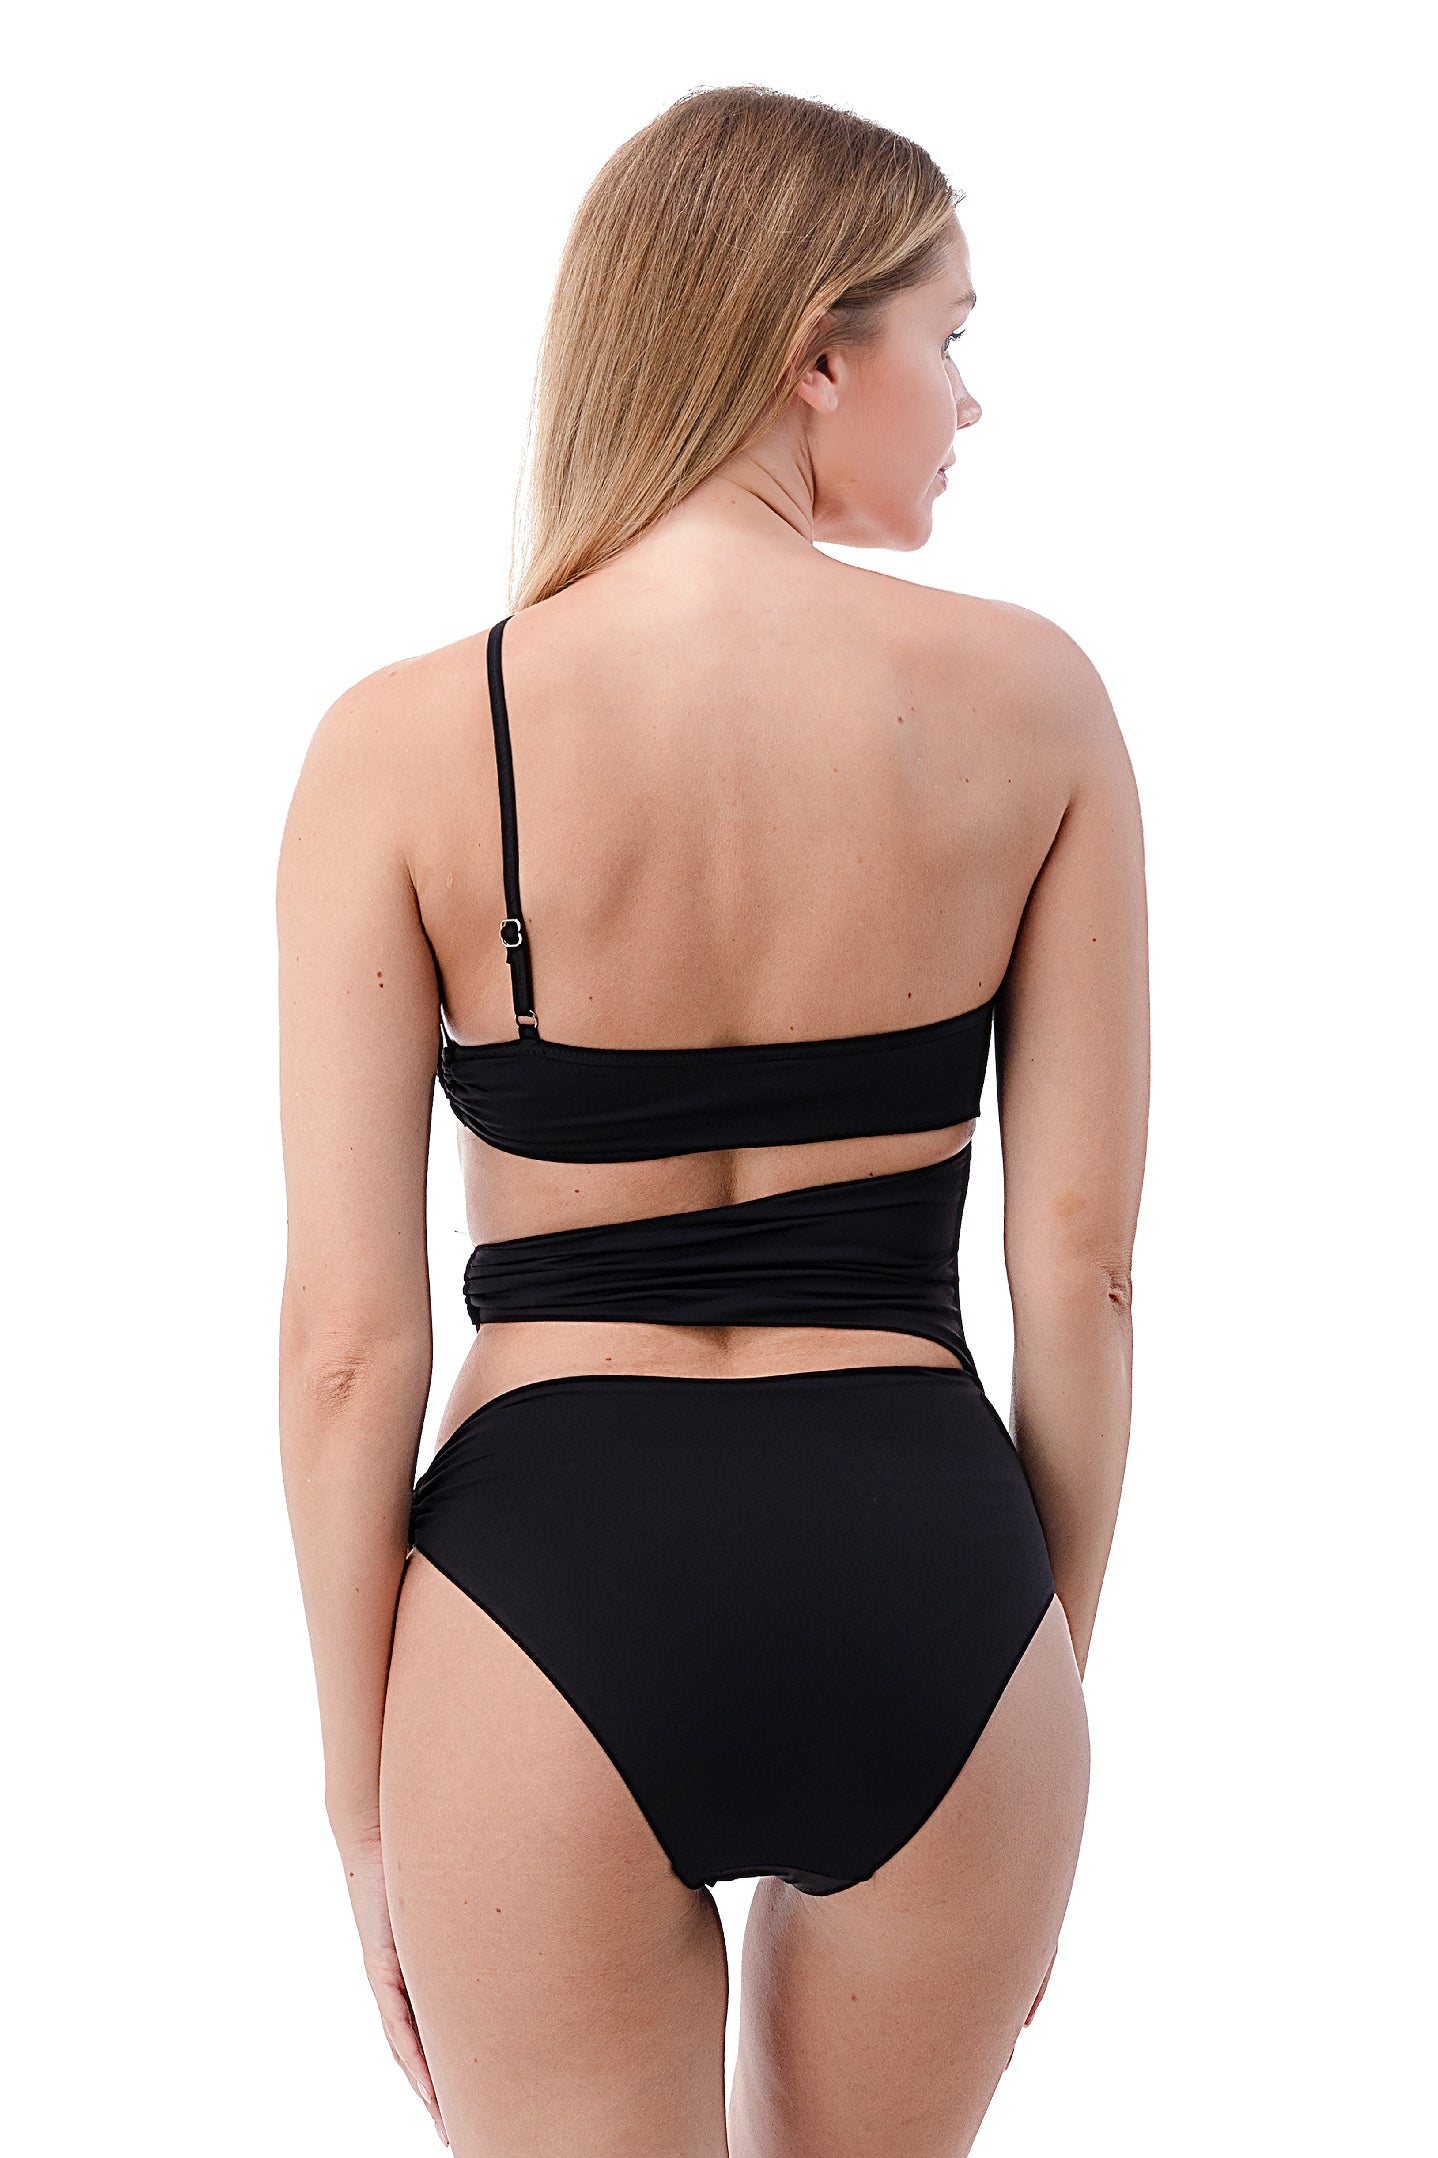 Carmelie Ring Side Asymmetric One-Piece, Cata Freer, Solid Black